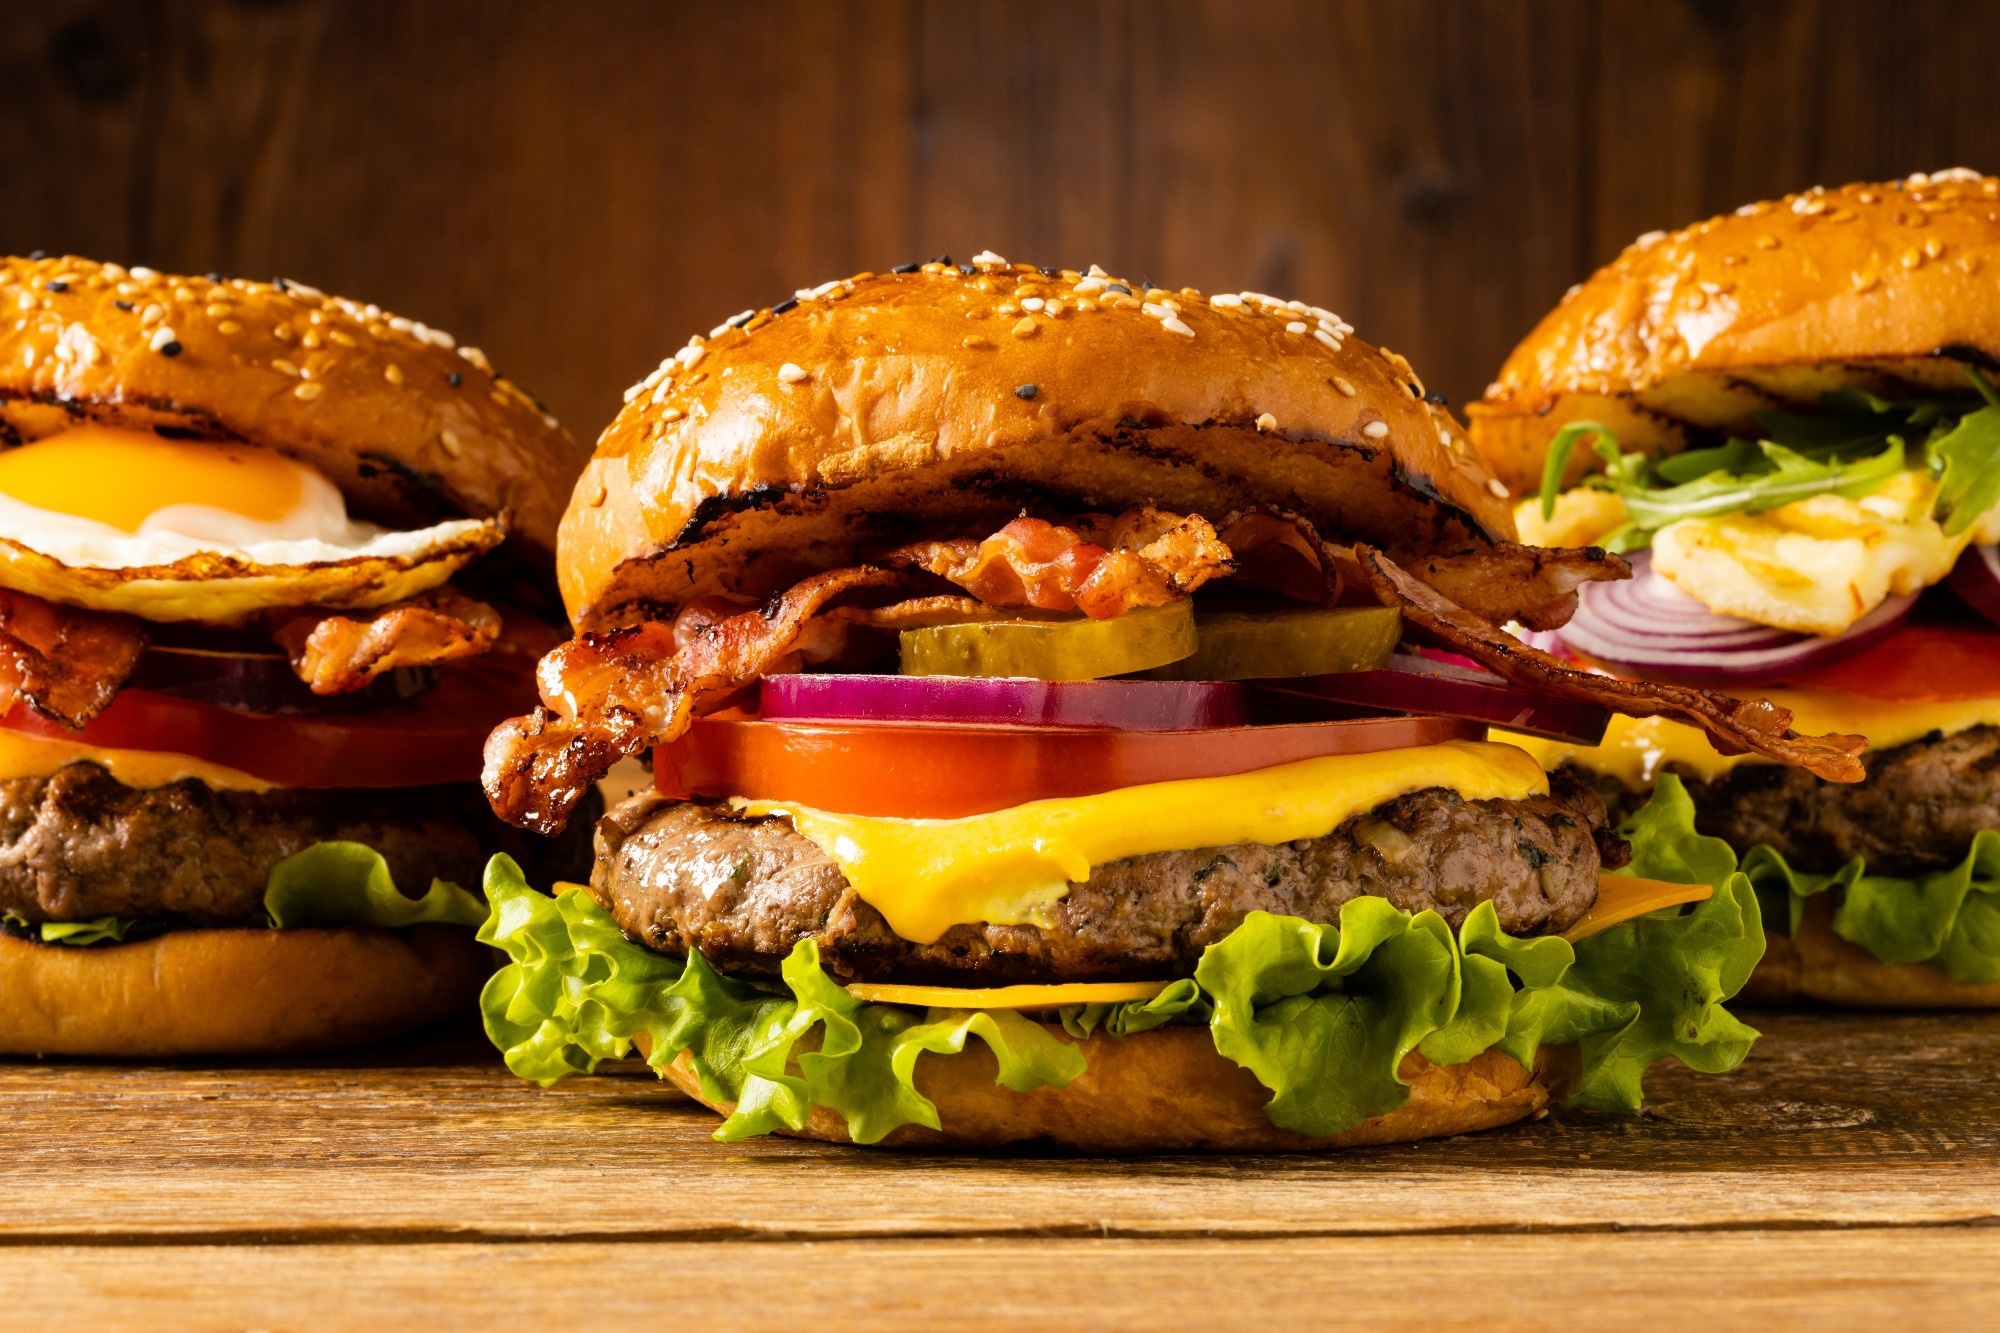 Study: The digestive fate of beef versus plant-based burgers from bolus to stool. Image Credit: gkrphoto/Shutterstock.com